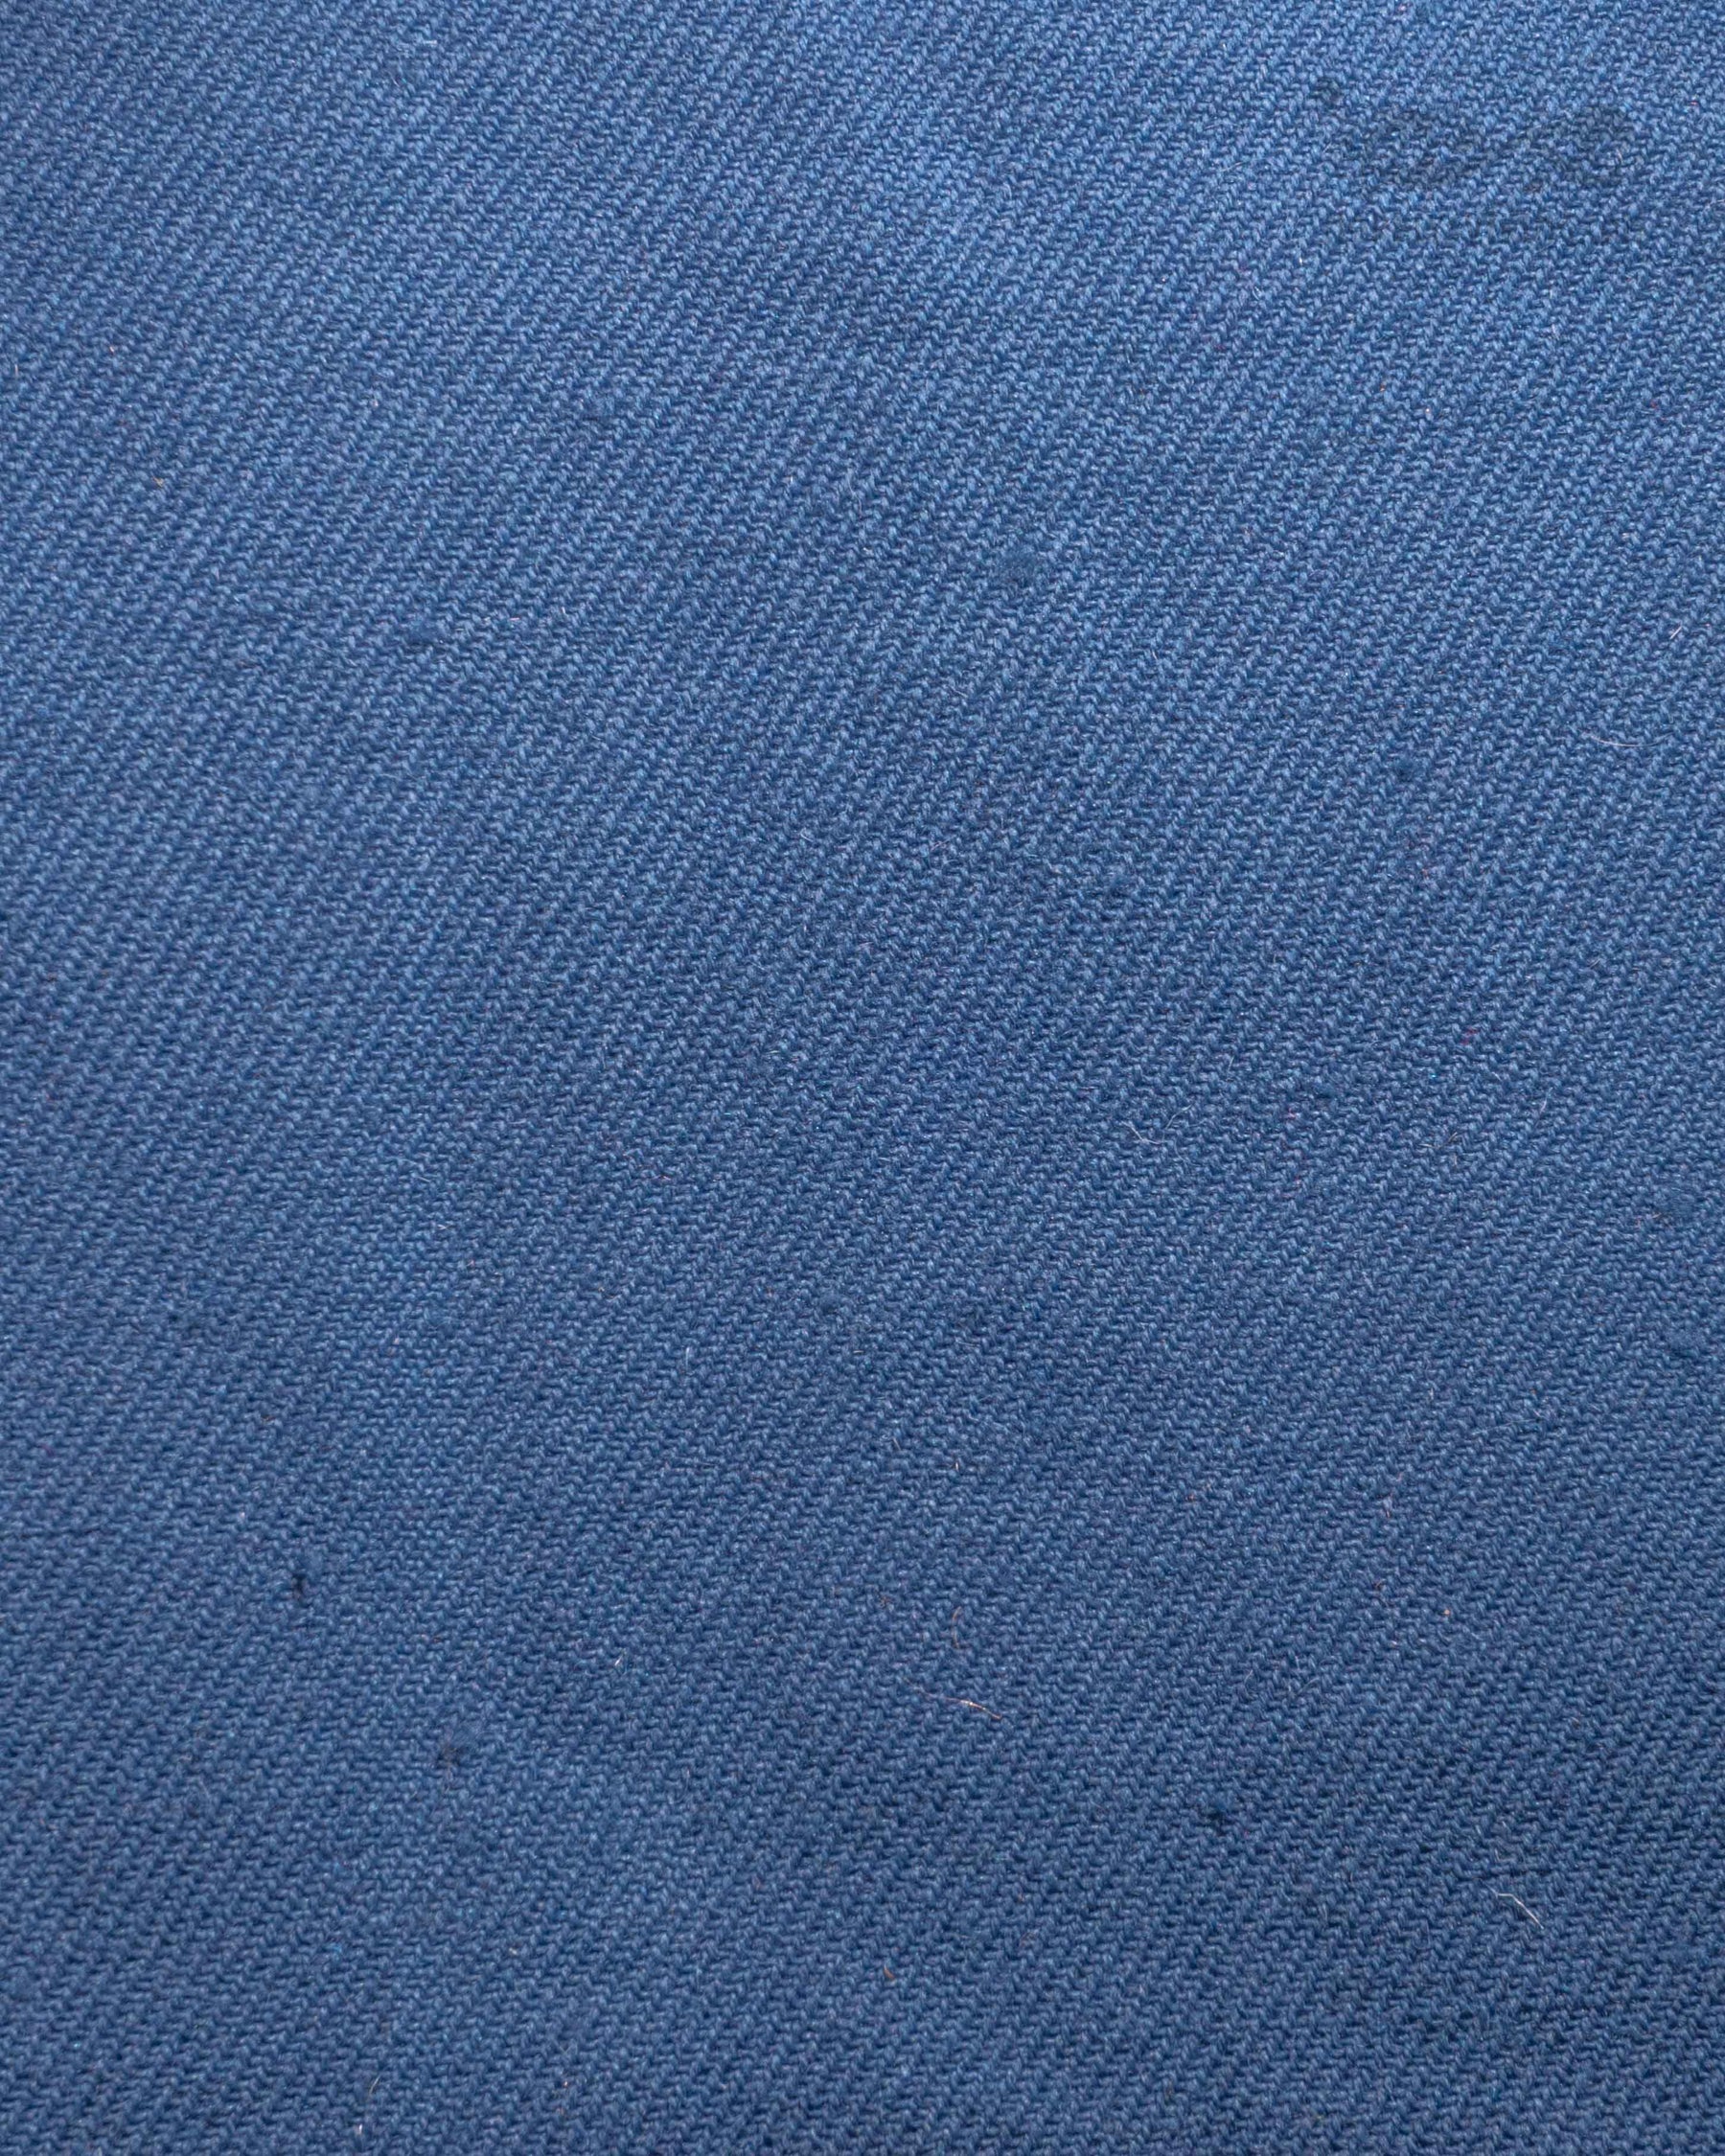 Plant-dyed wool fabric blue twill